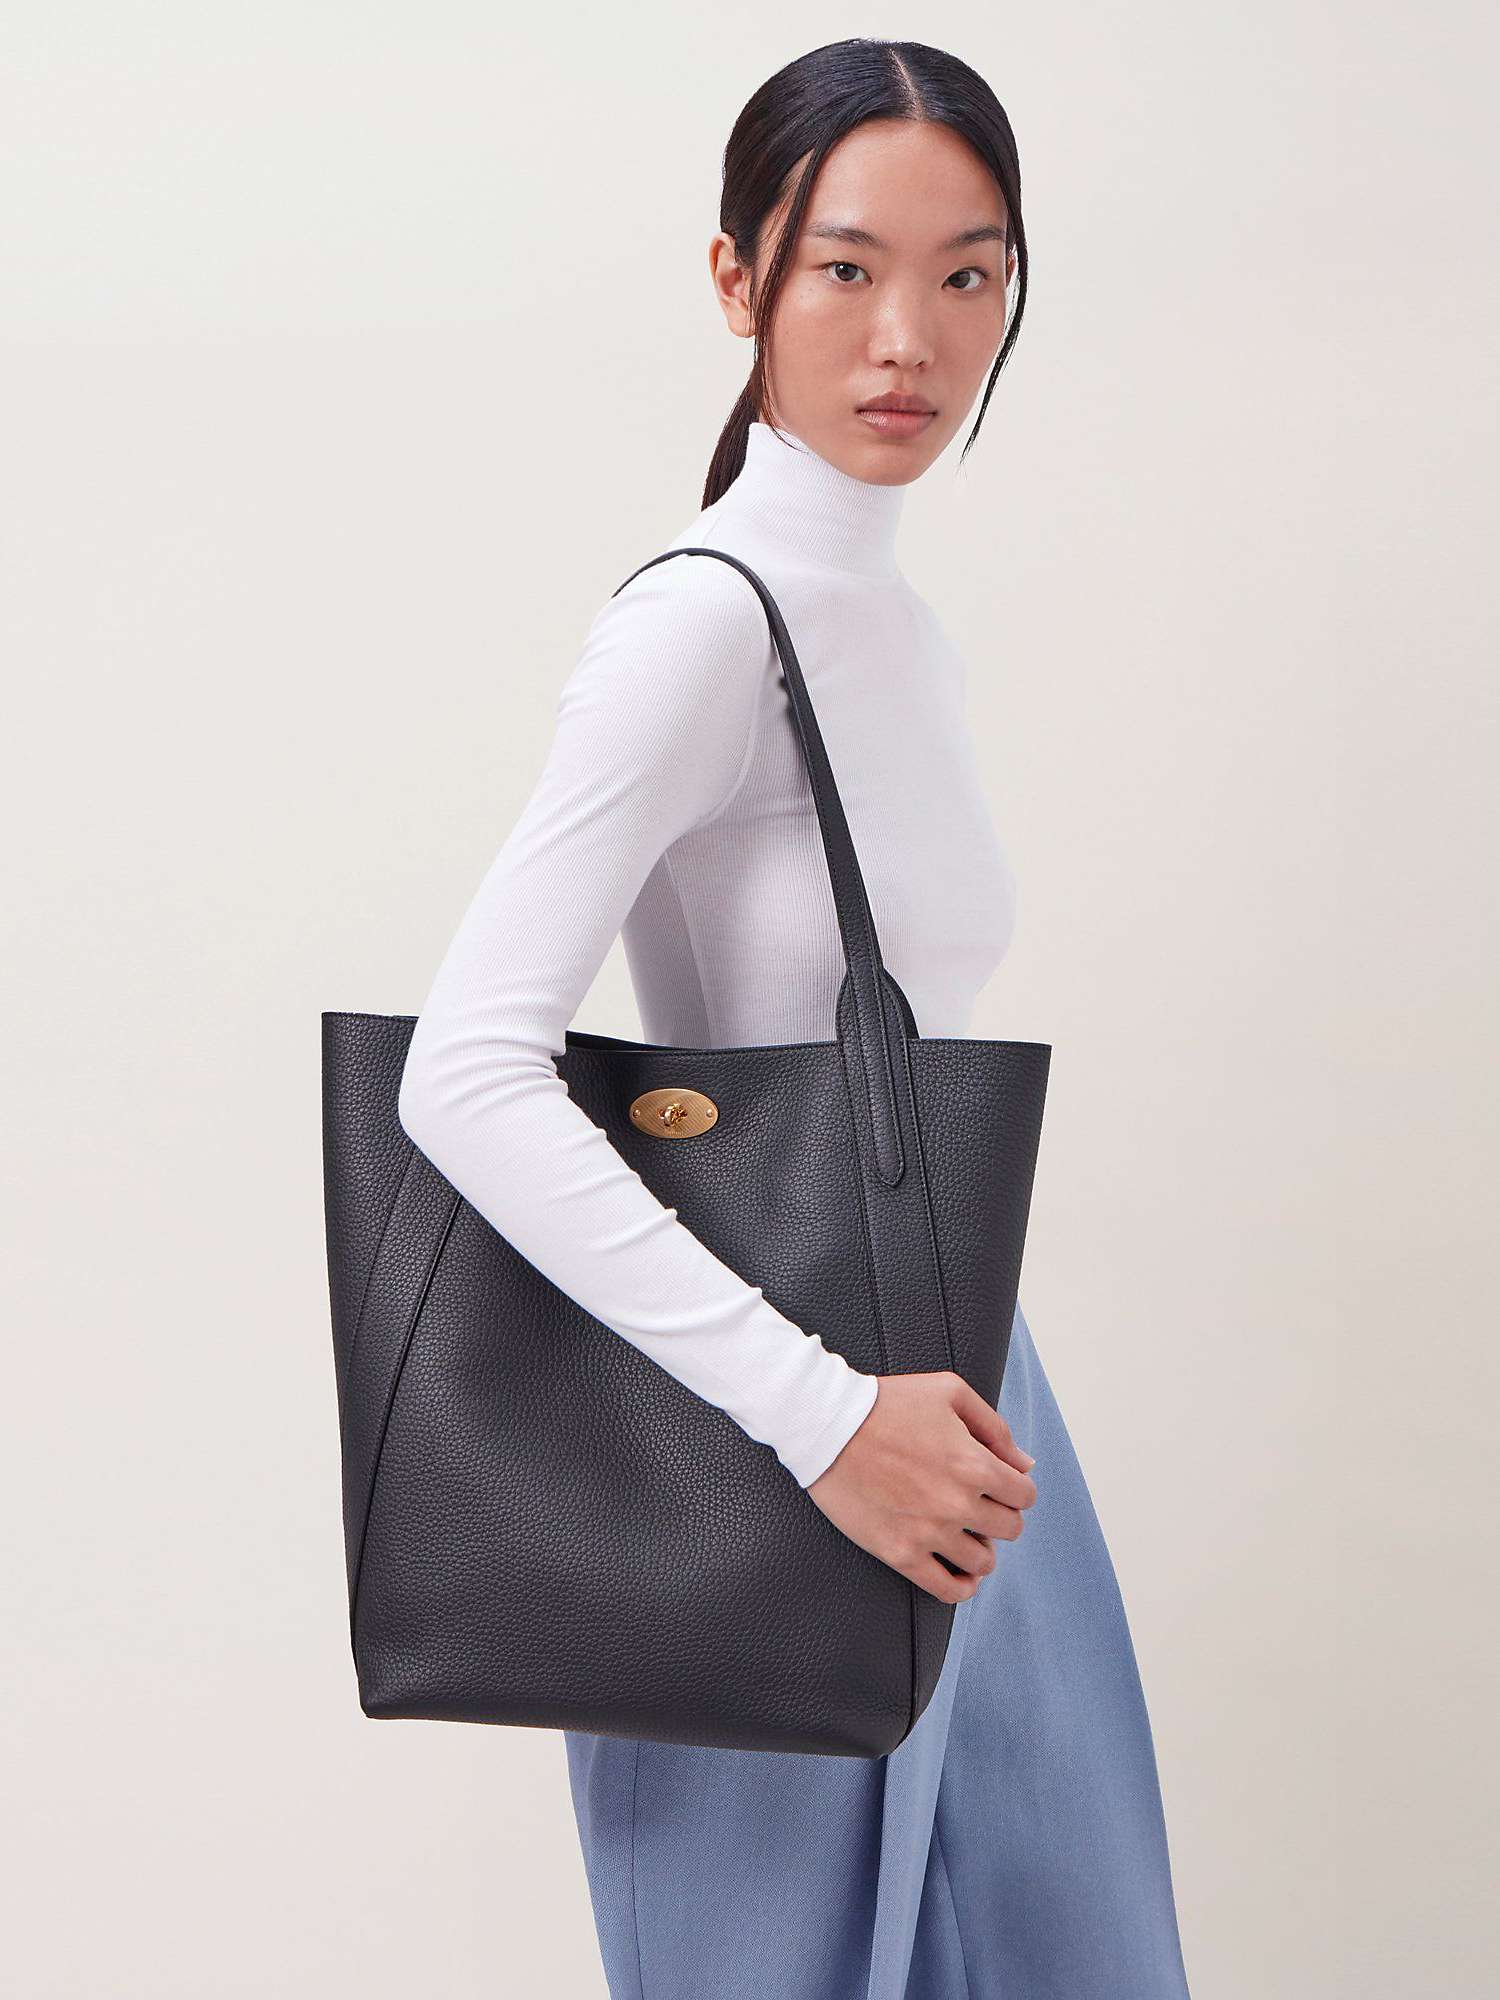 Buy Mulberry North South Bayswater Heavy Grain Tote Bag Online at johnlewis.com